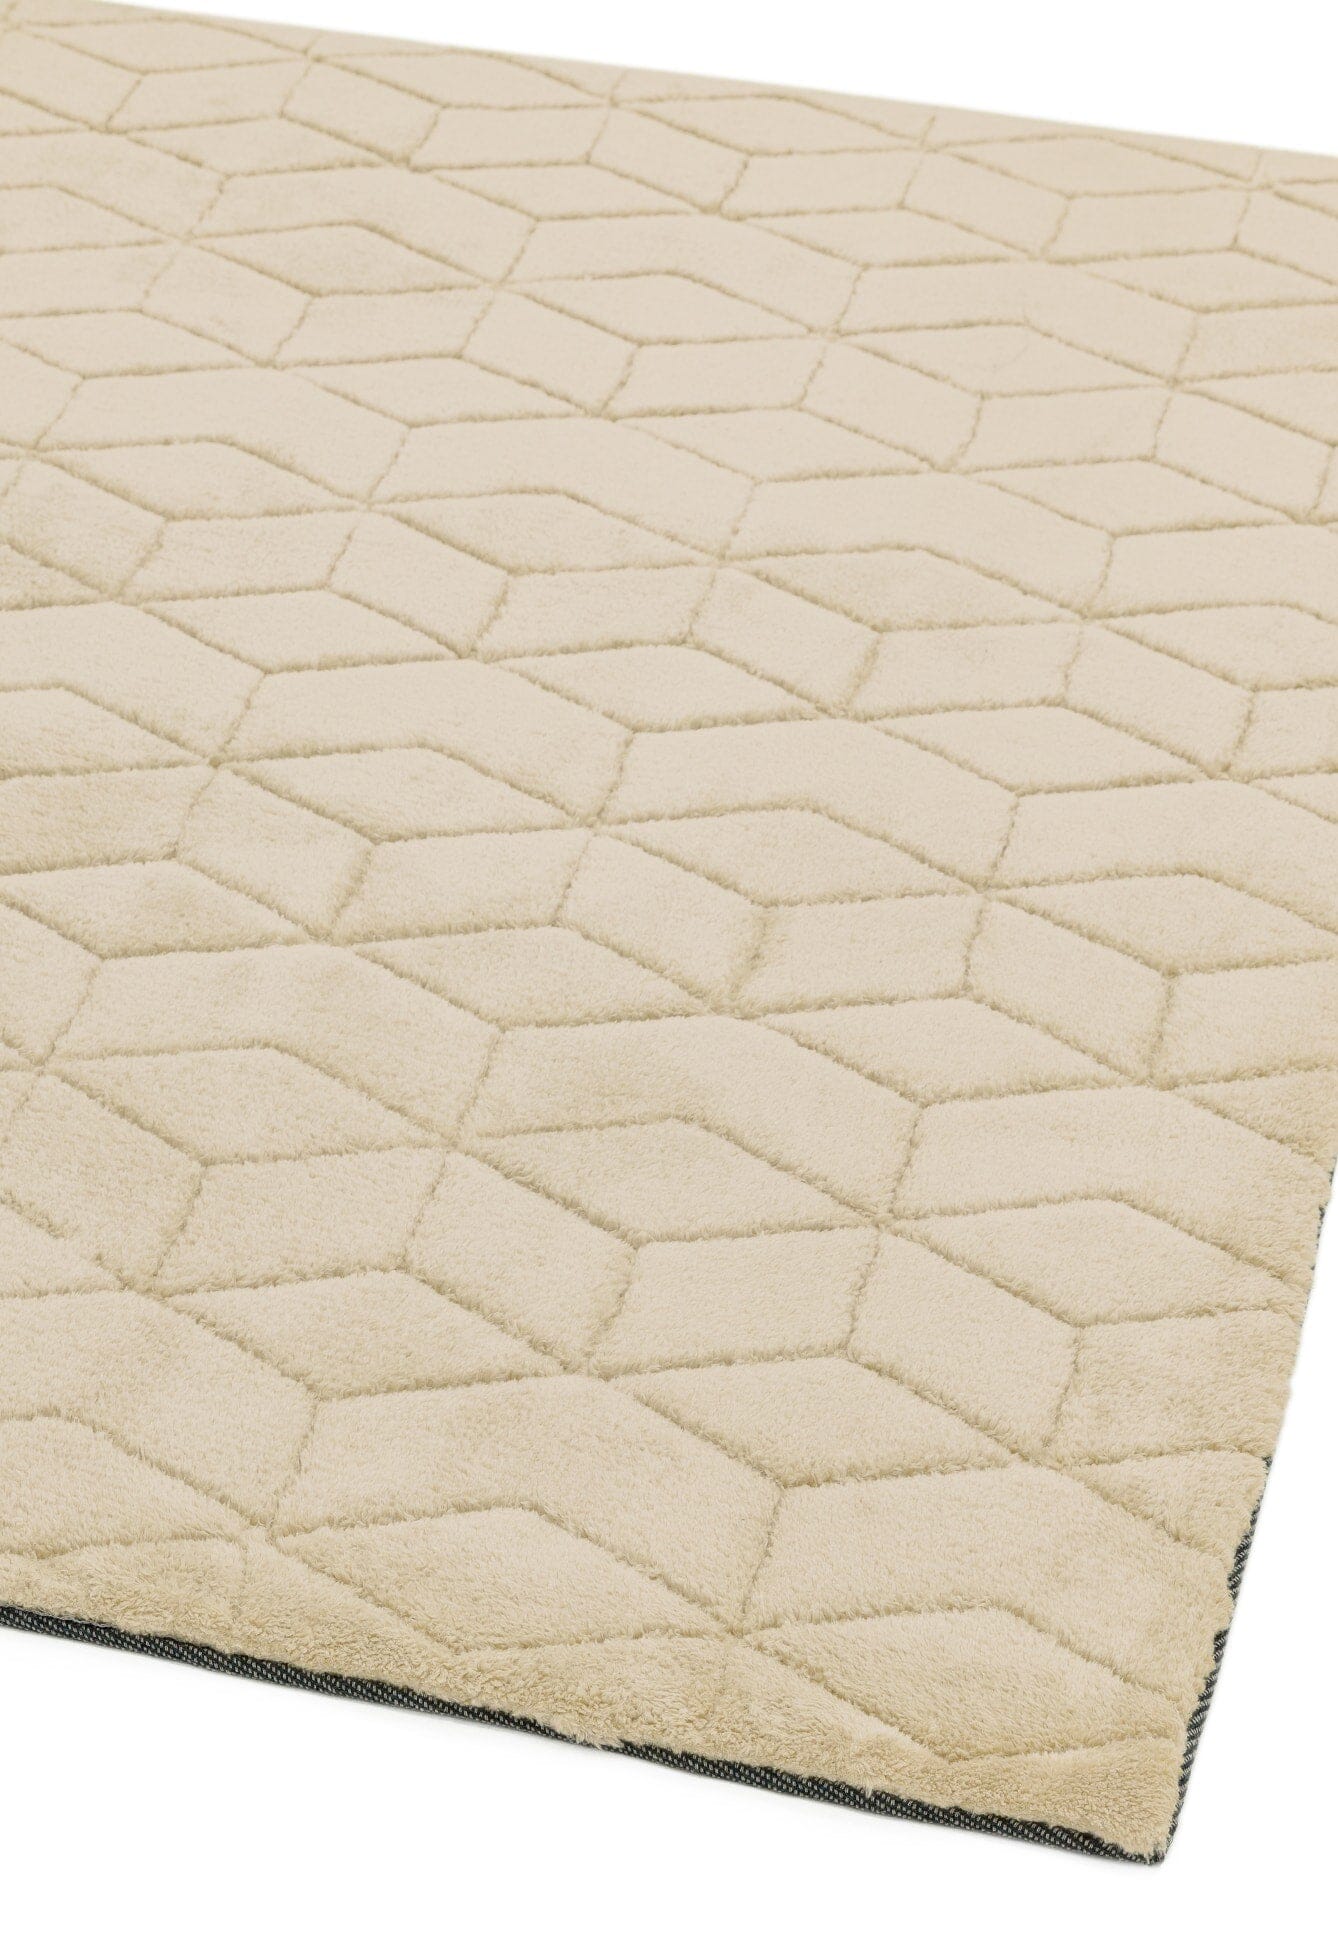  Asiatic Carpets-Asiatic Carpets Cozy knitted Rug Beige - 160 x 230cm-Beige, Natural 949 